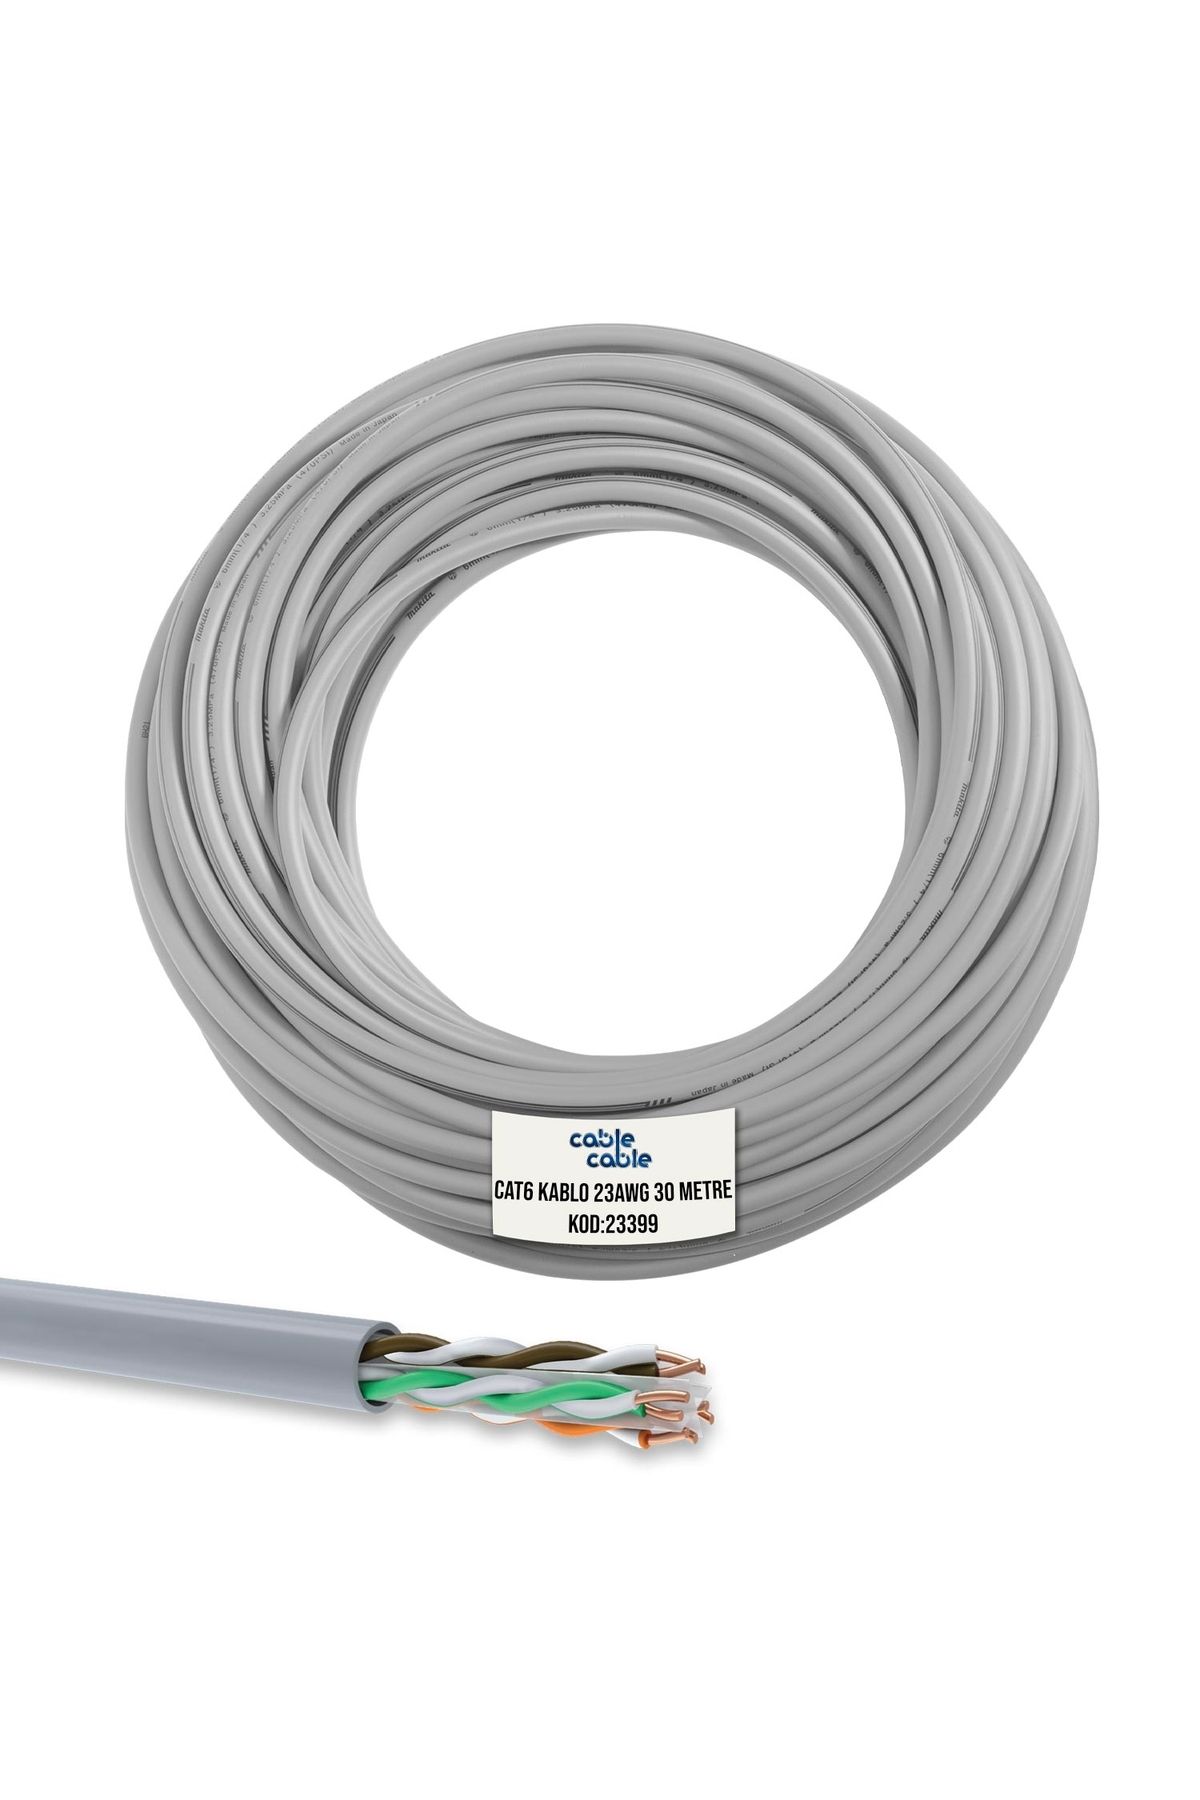 POLAXTOR Cablecable Cat6 Kablo 23awg 0.51mm 30 Metre